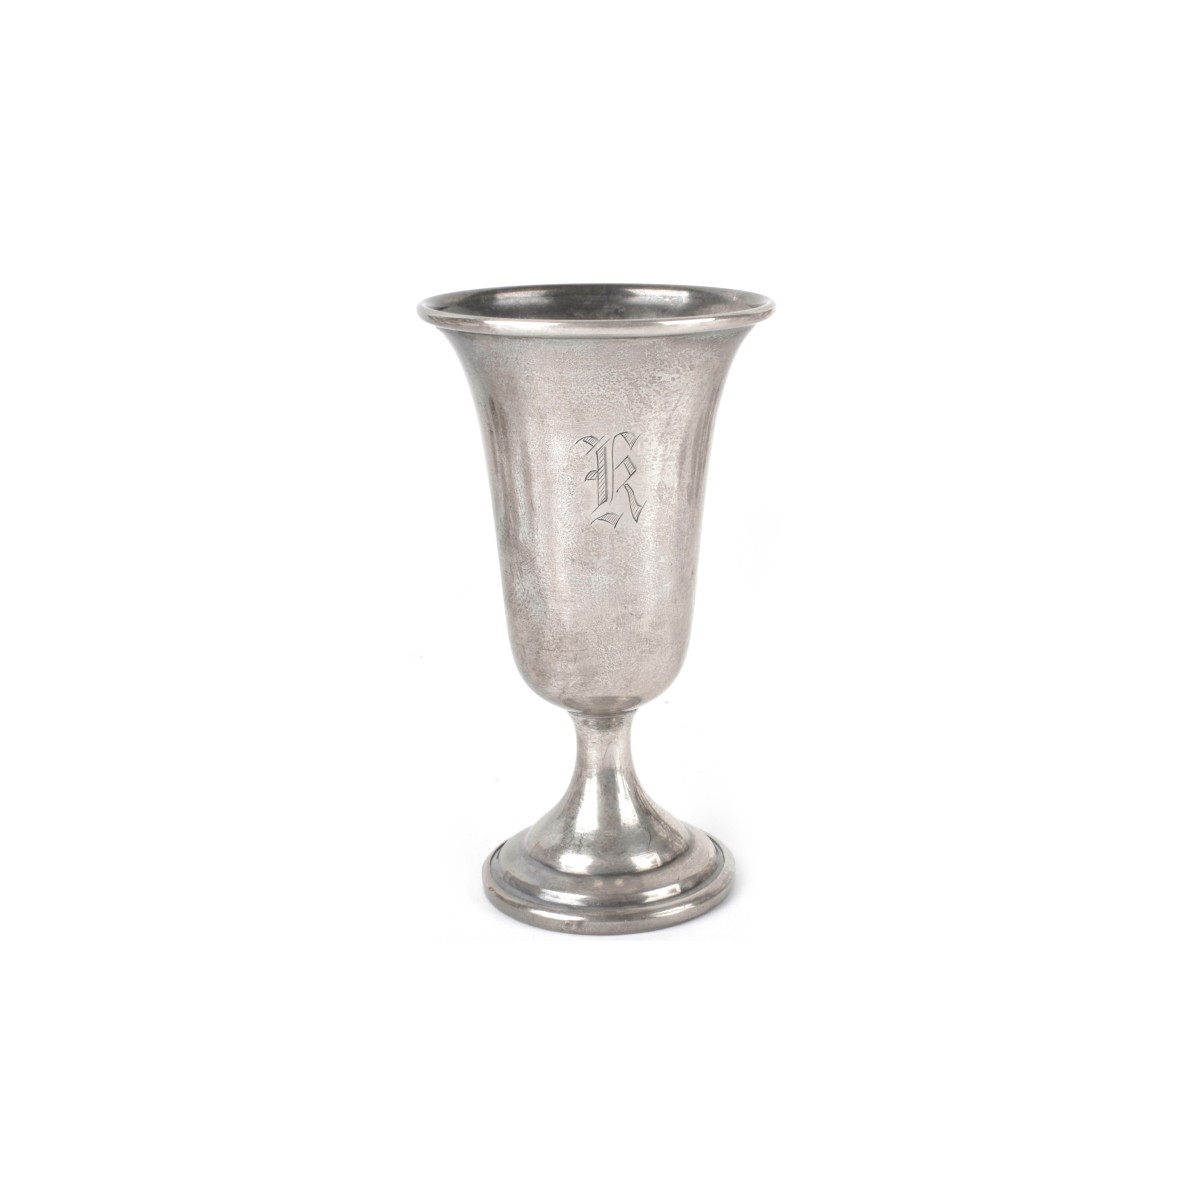 Weighted Kiddush Cups